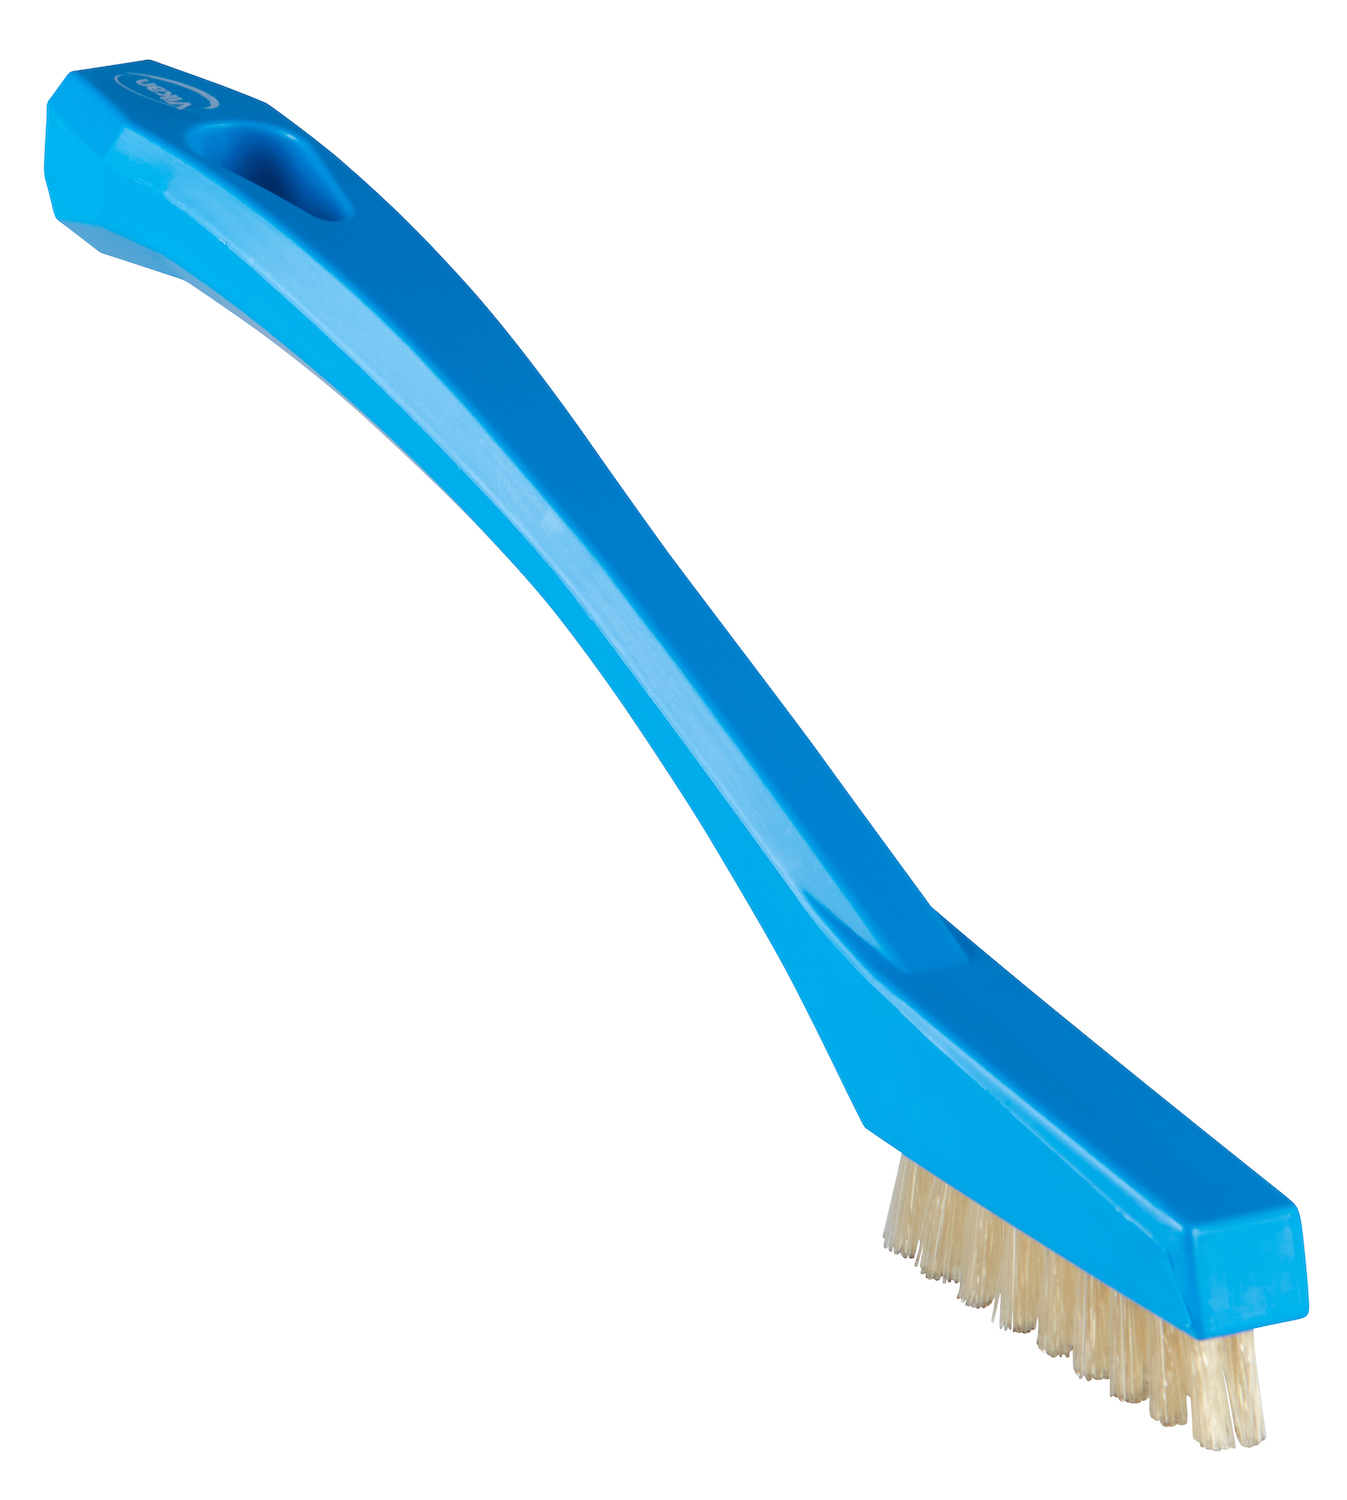 Detail Brush with heat resistant filaments, 205 mm, Very hard, Blue